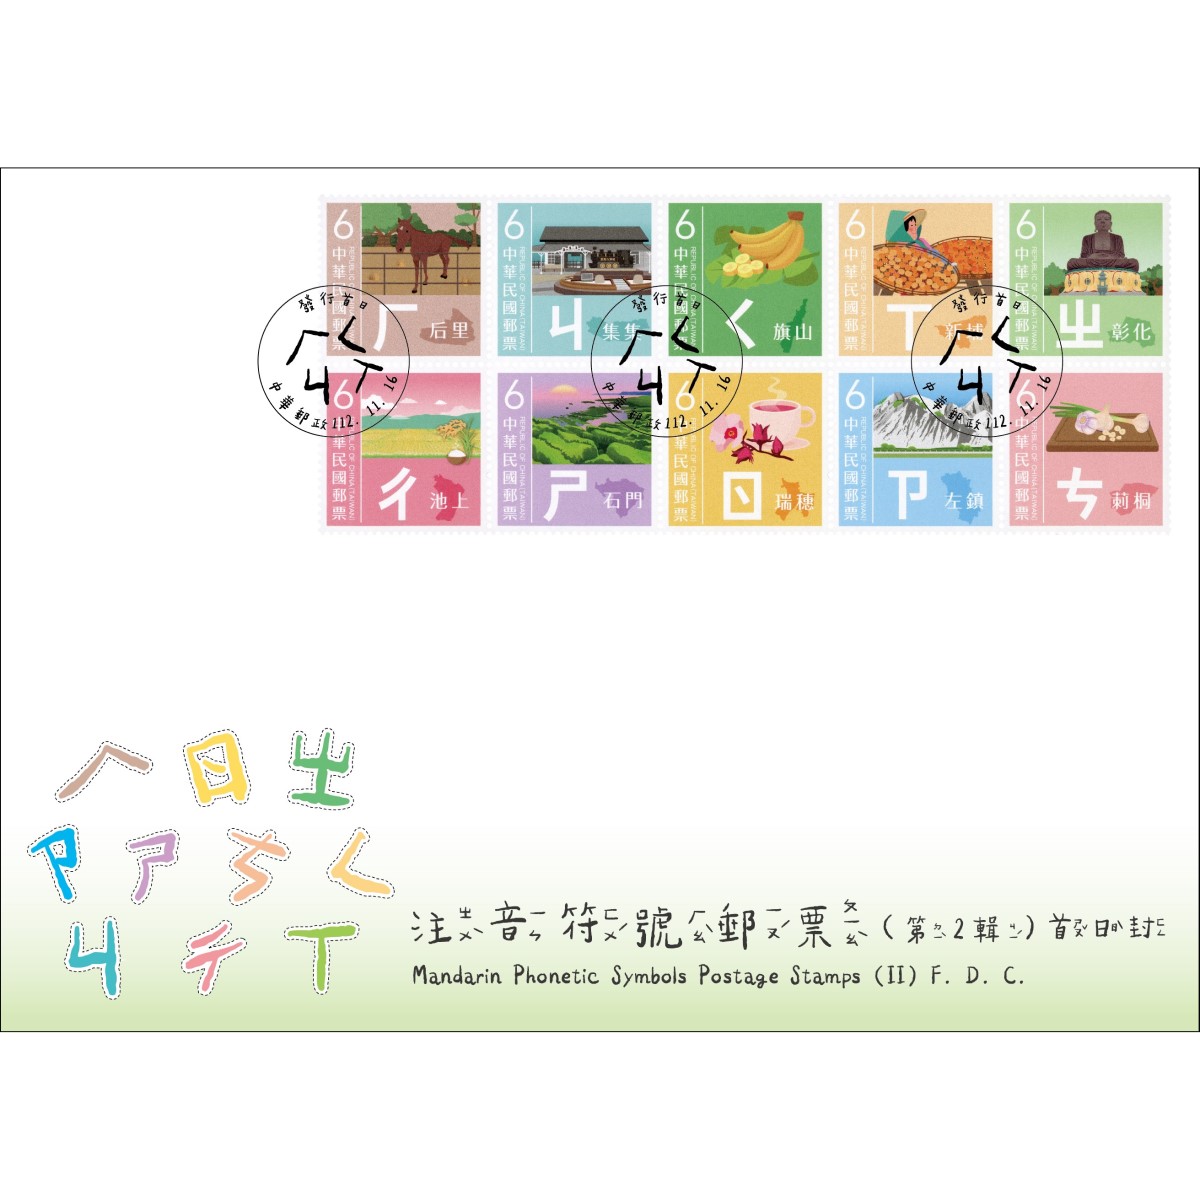 Mandarin Phonetic Symbols Postage Stamps (II) Pre-cancelled FDC affixed with a complete set of stamps